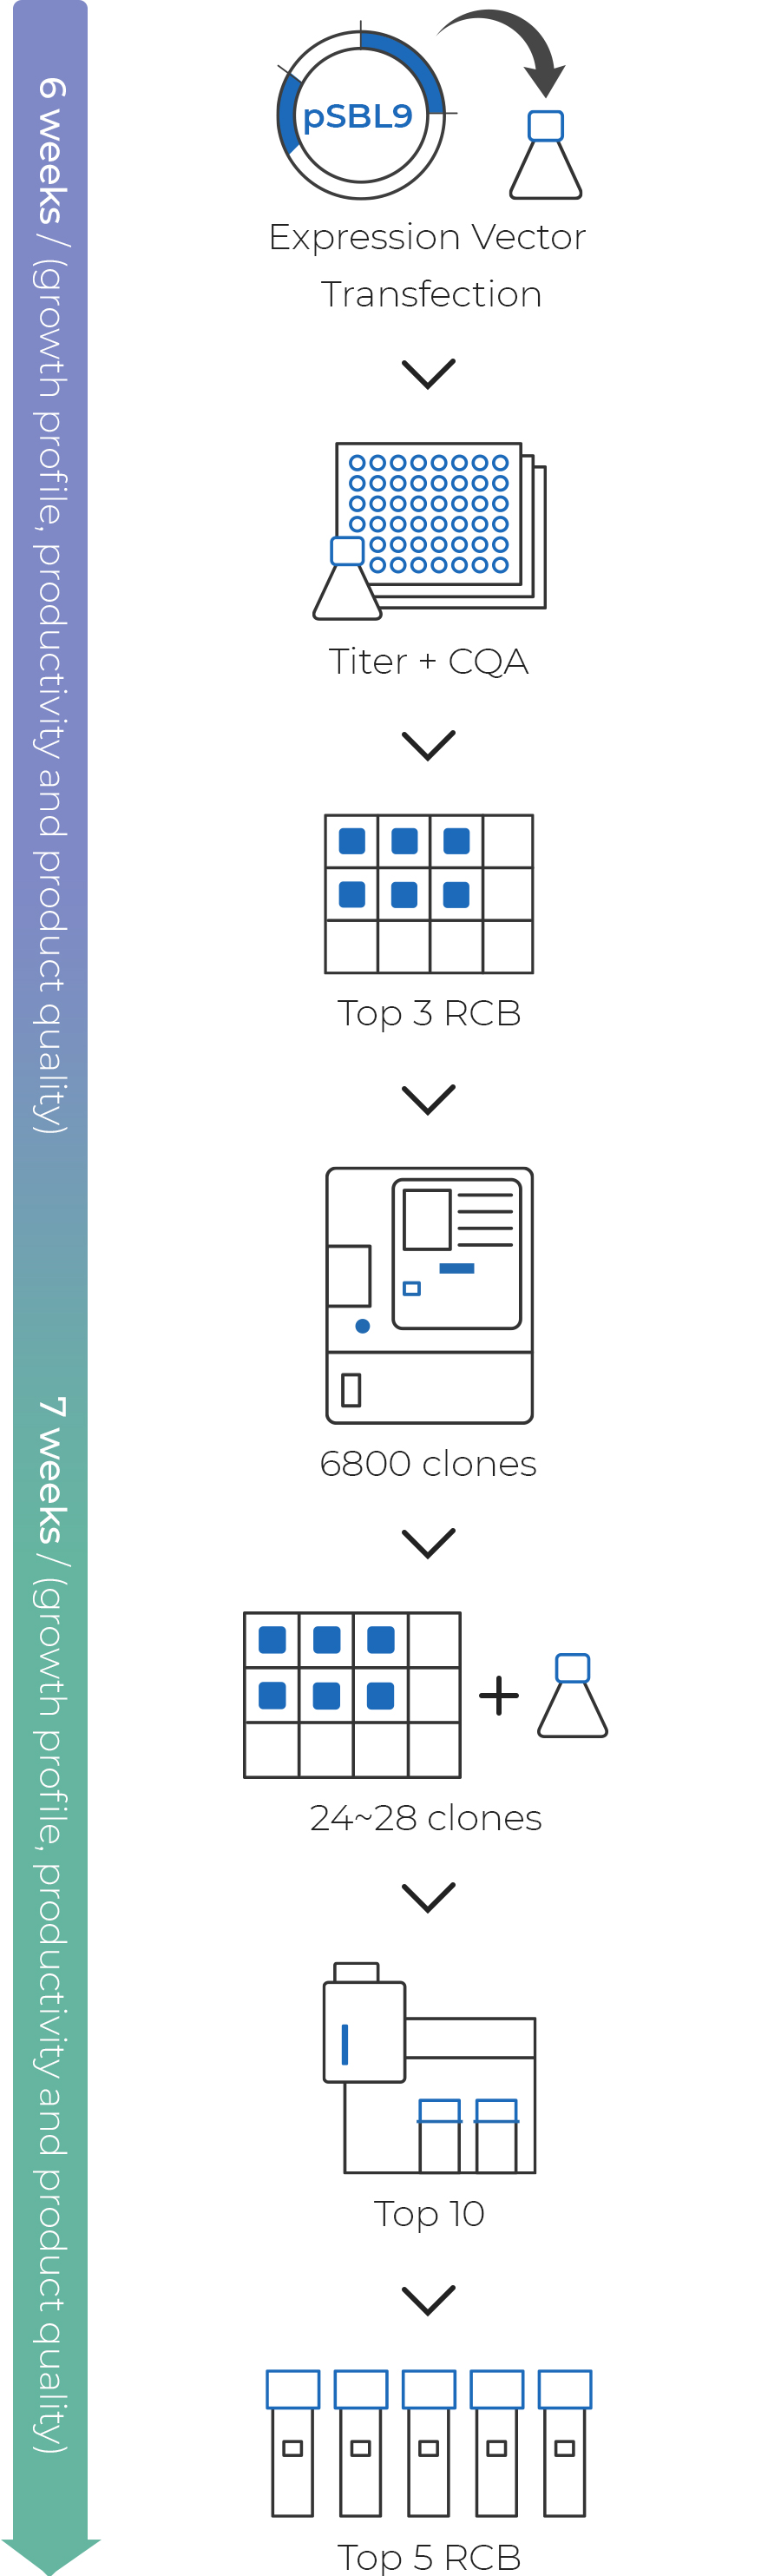 Single Cell Cloning with Beacon